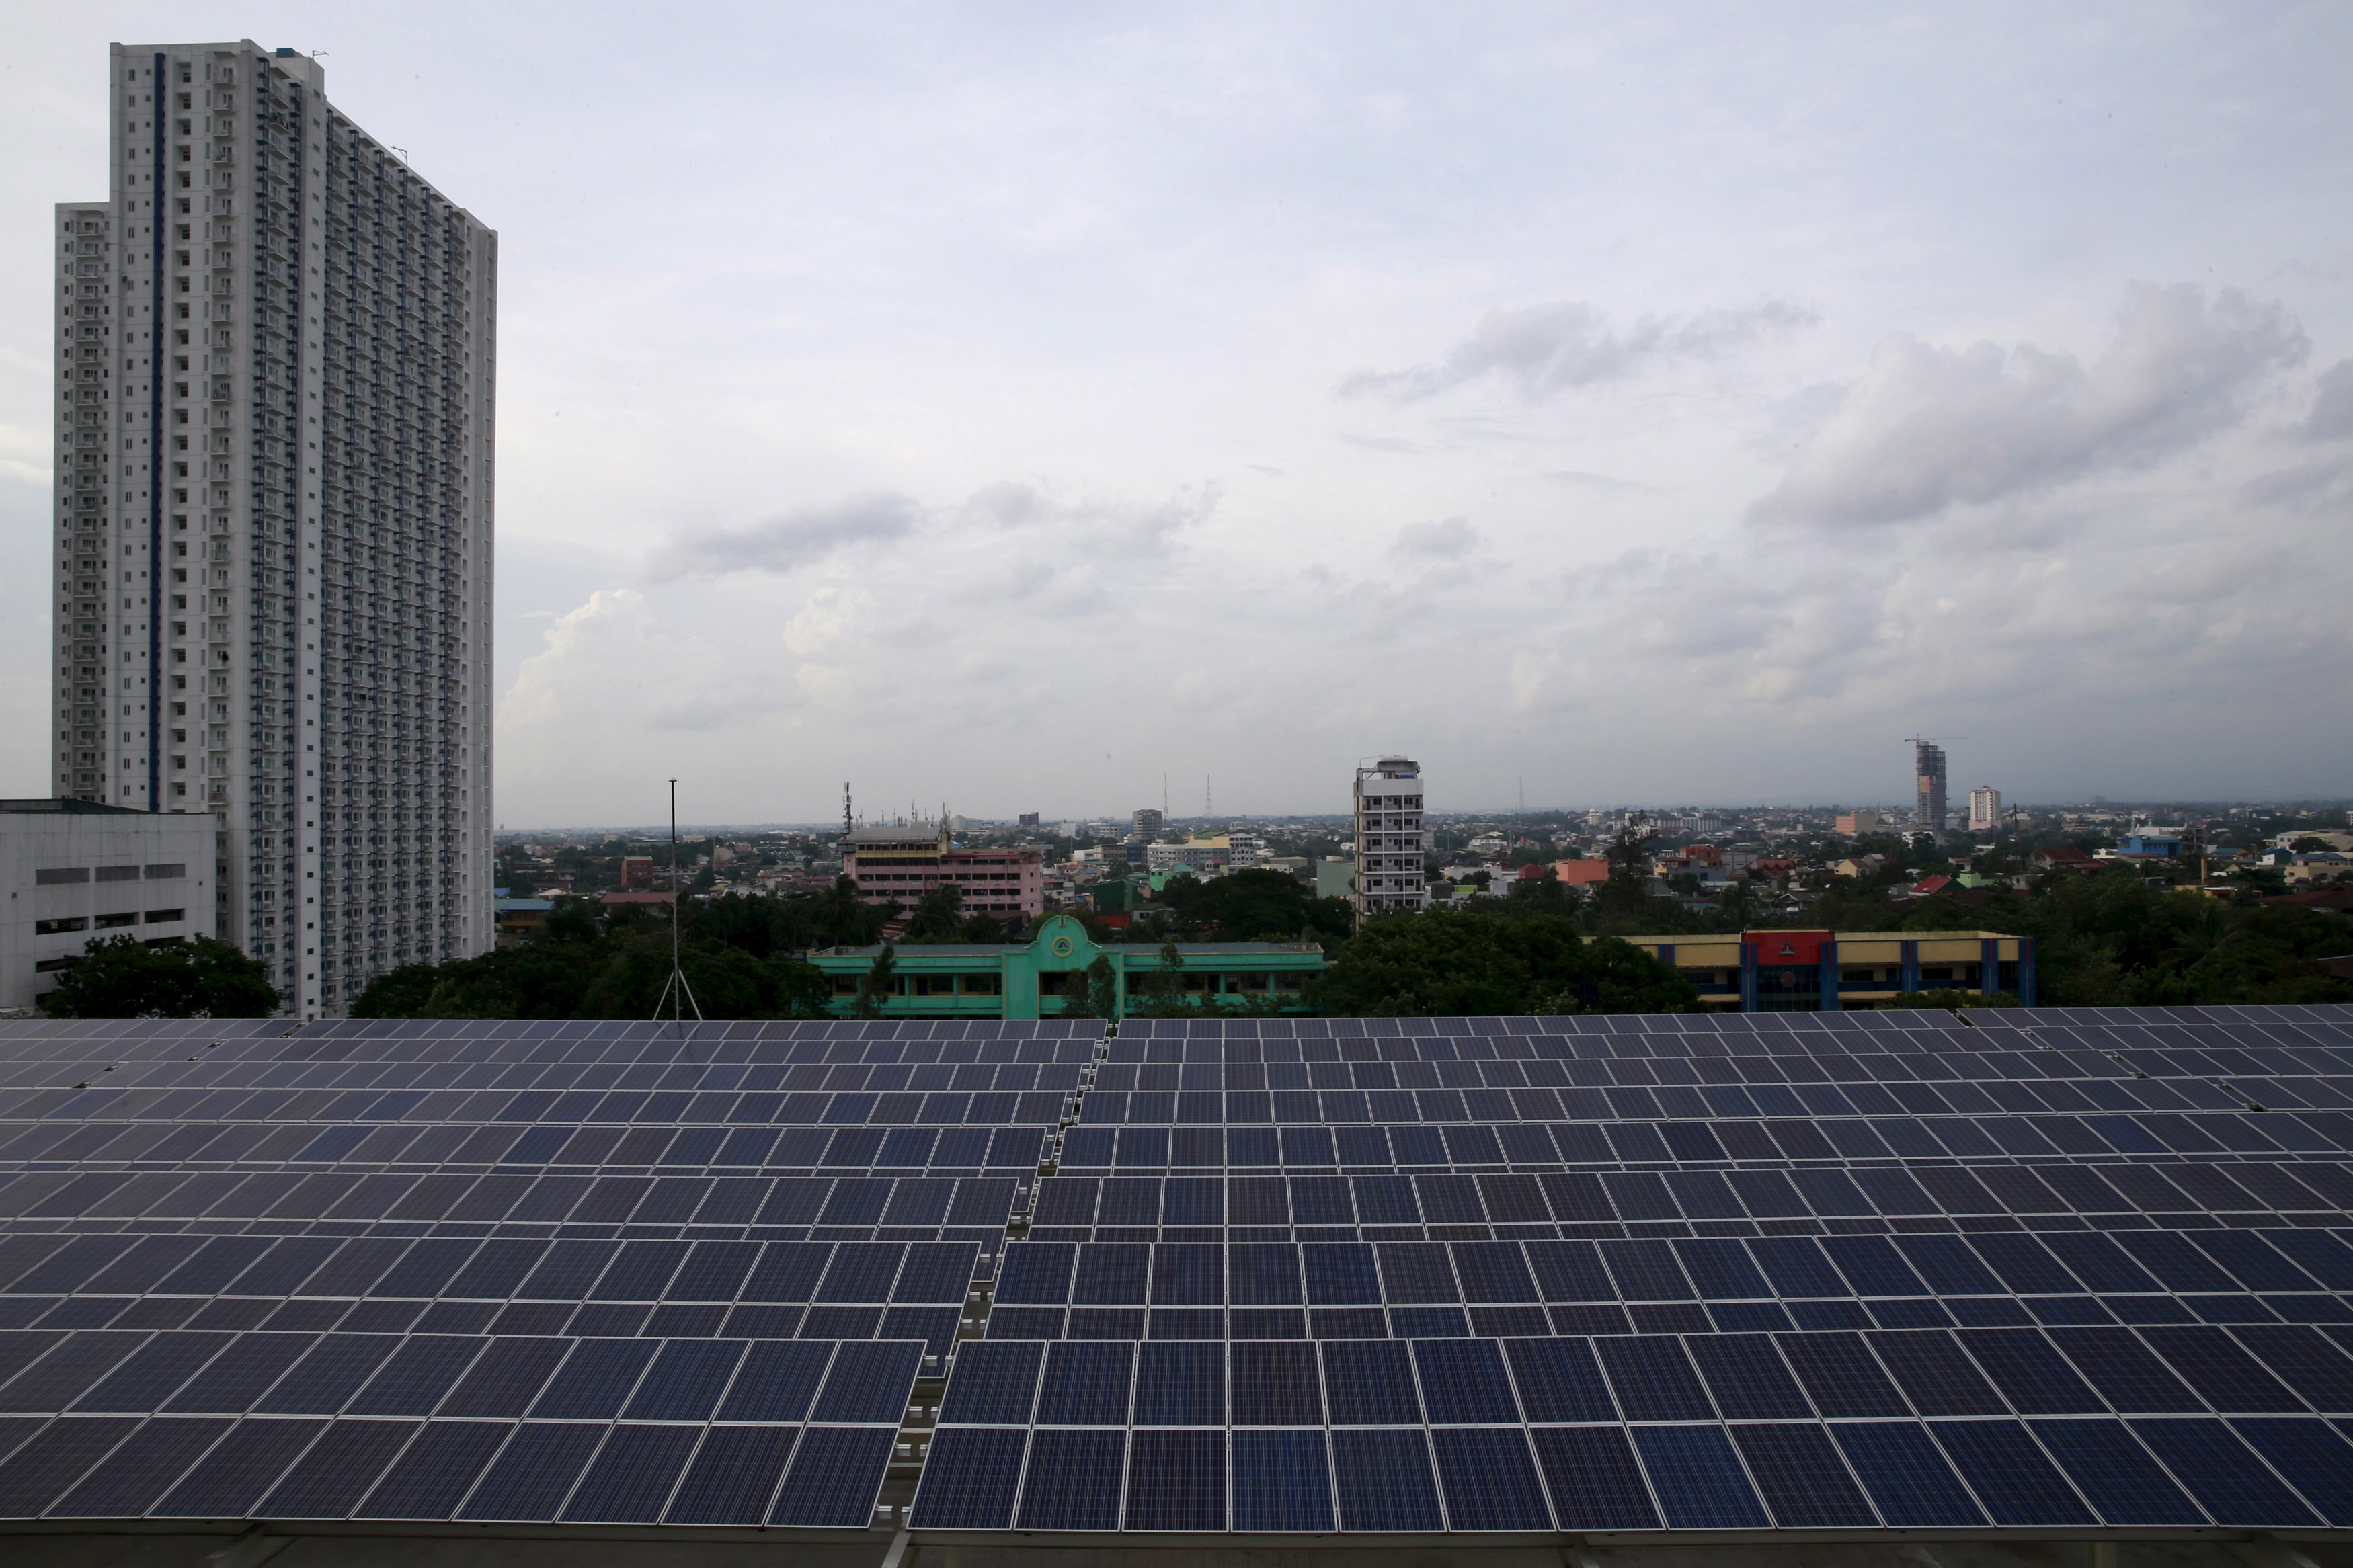 Solar panels are seen on the roof deck of a mall in Quezon city, metro Manila July 13, 2015. REUTERS/Romeo Ranoco